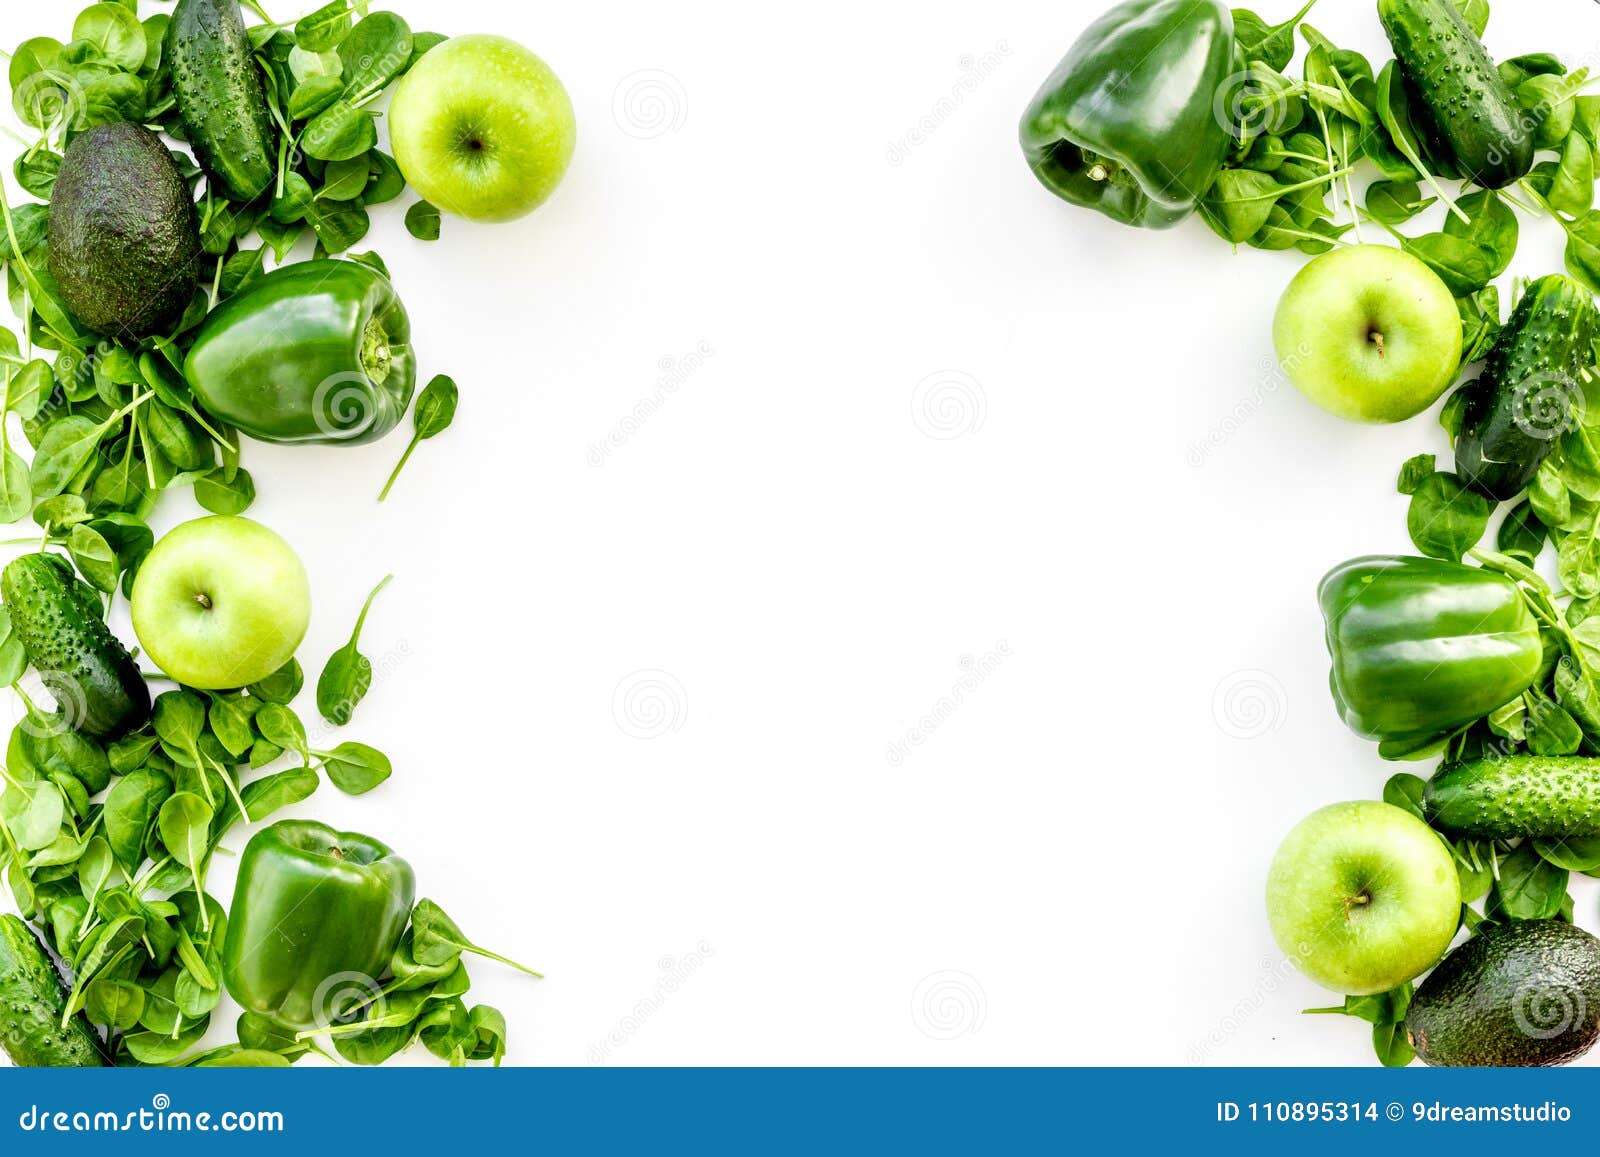 Green Vegetables Background. Shiny Bell Pepper, Cucumber, Arugula Salad,  Avocado and Fresh Apple on White Background Top Stock Photo - Image of  health, nutrition: 110895314